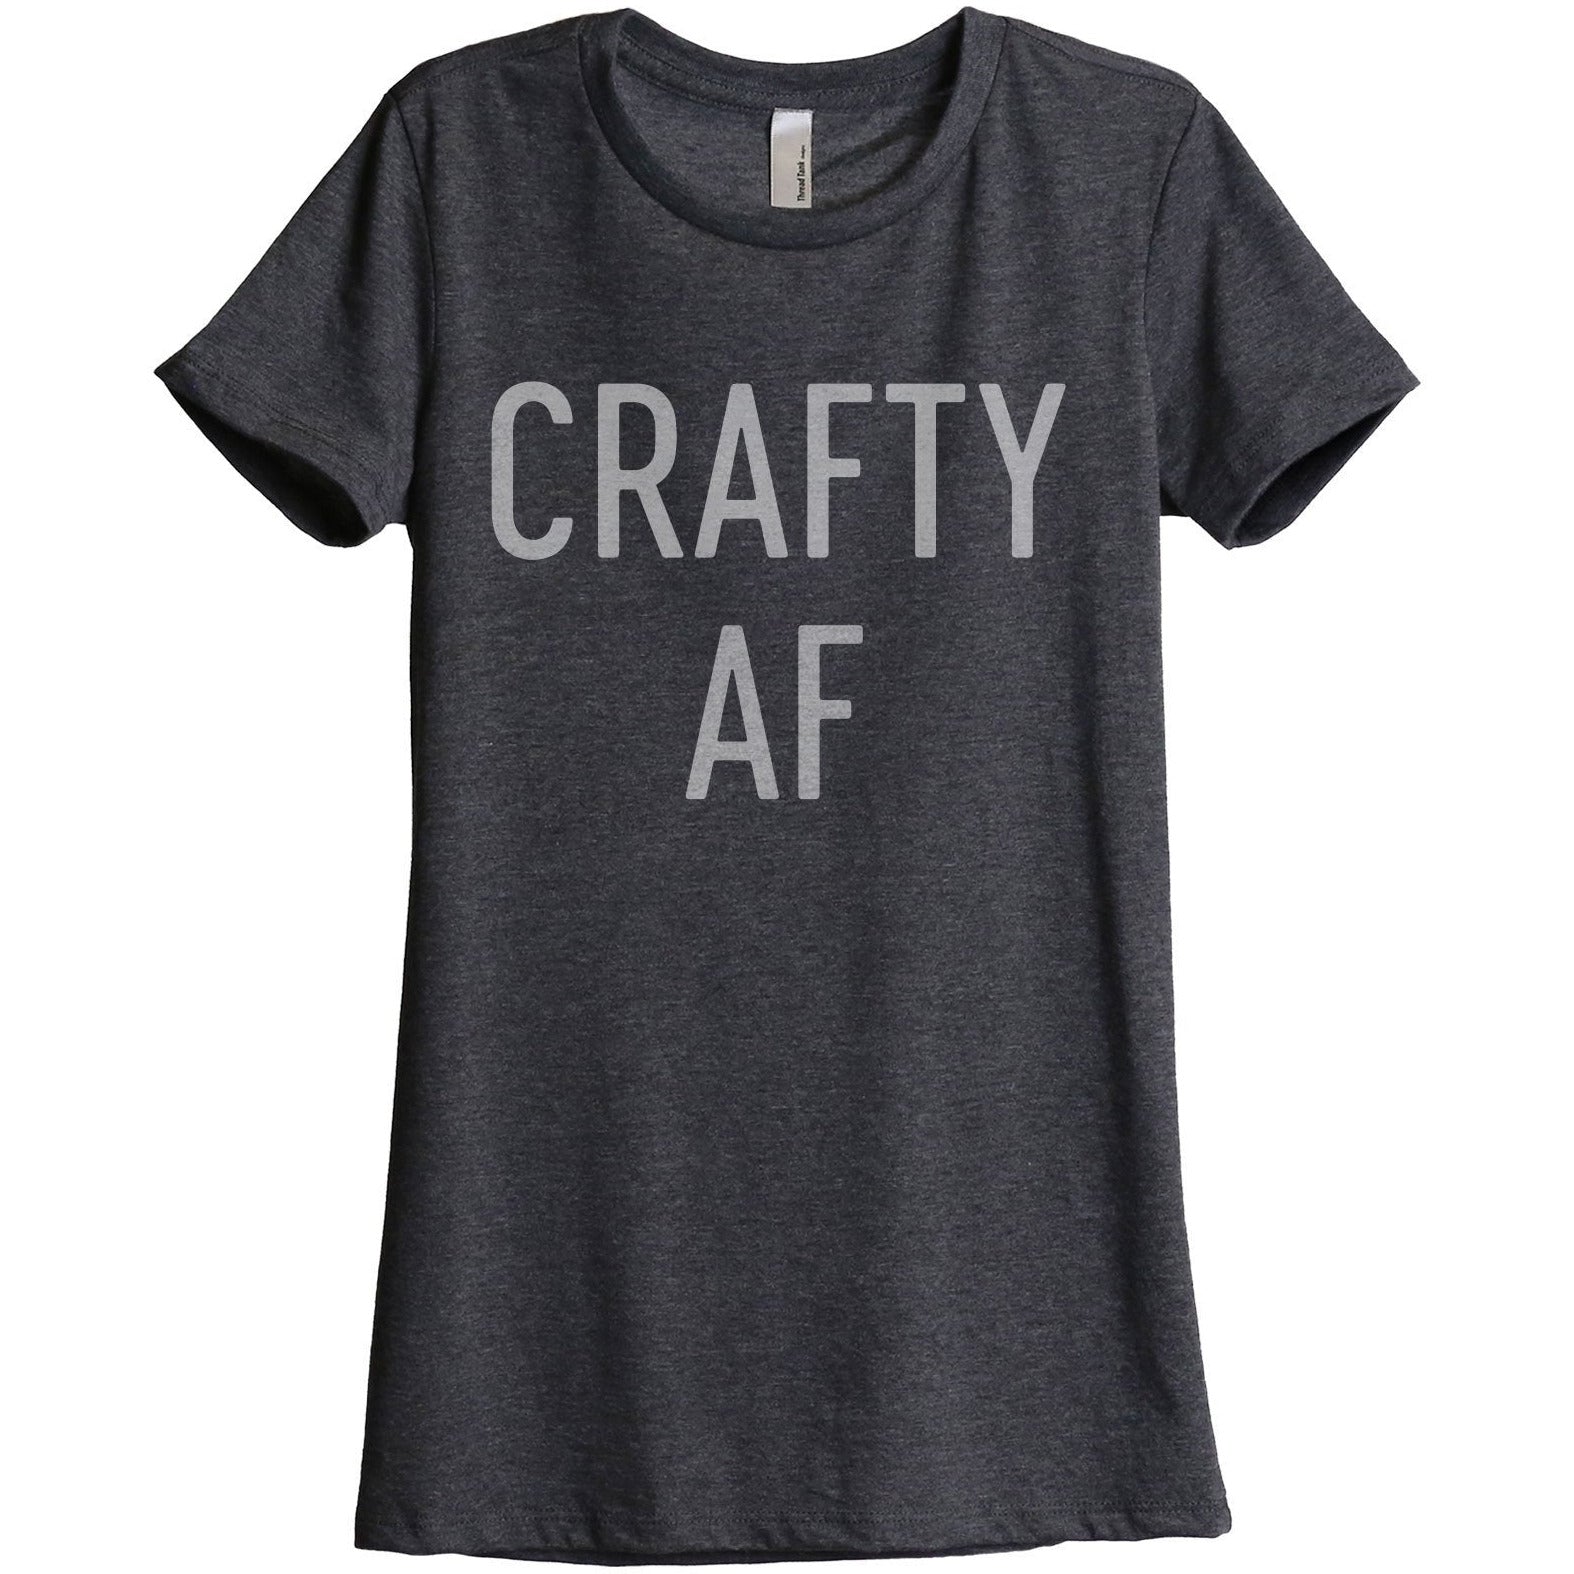 Crafty AF Women's Relaxed Crewneck T-Shirt Top Tee Charcoal Grey
